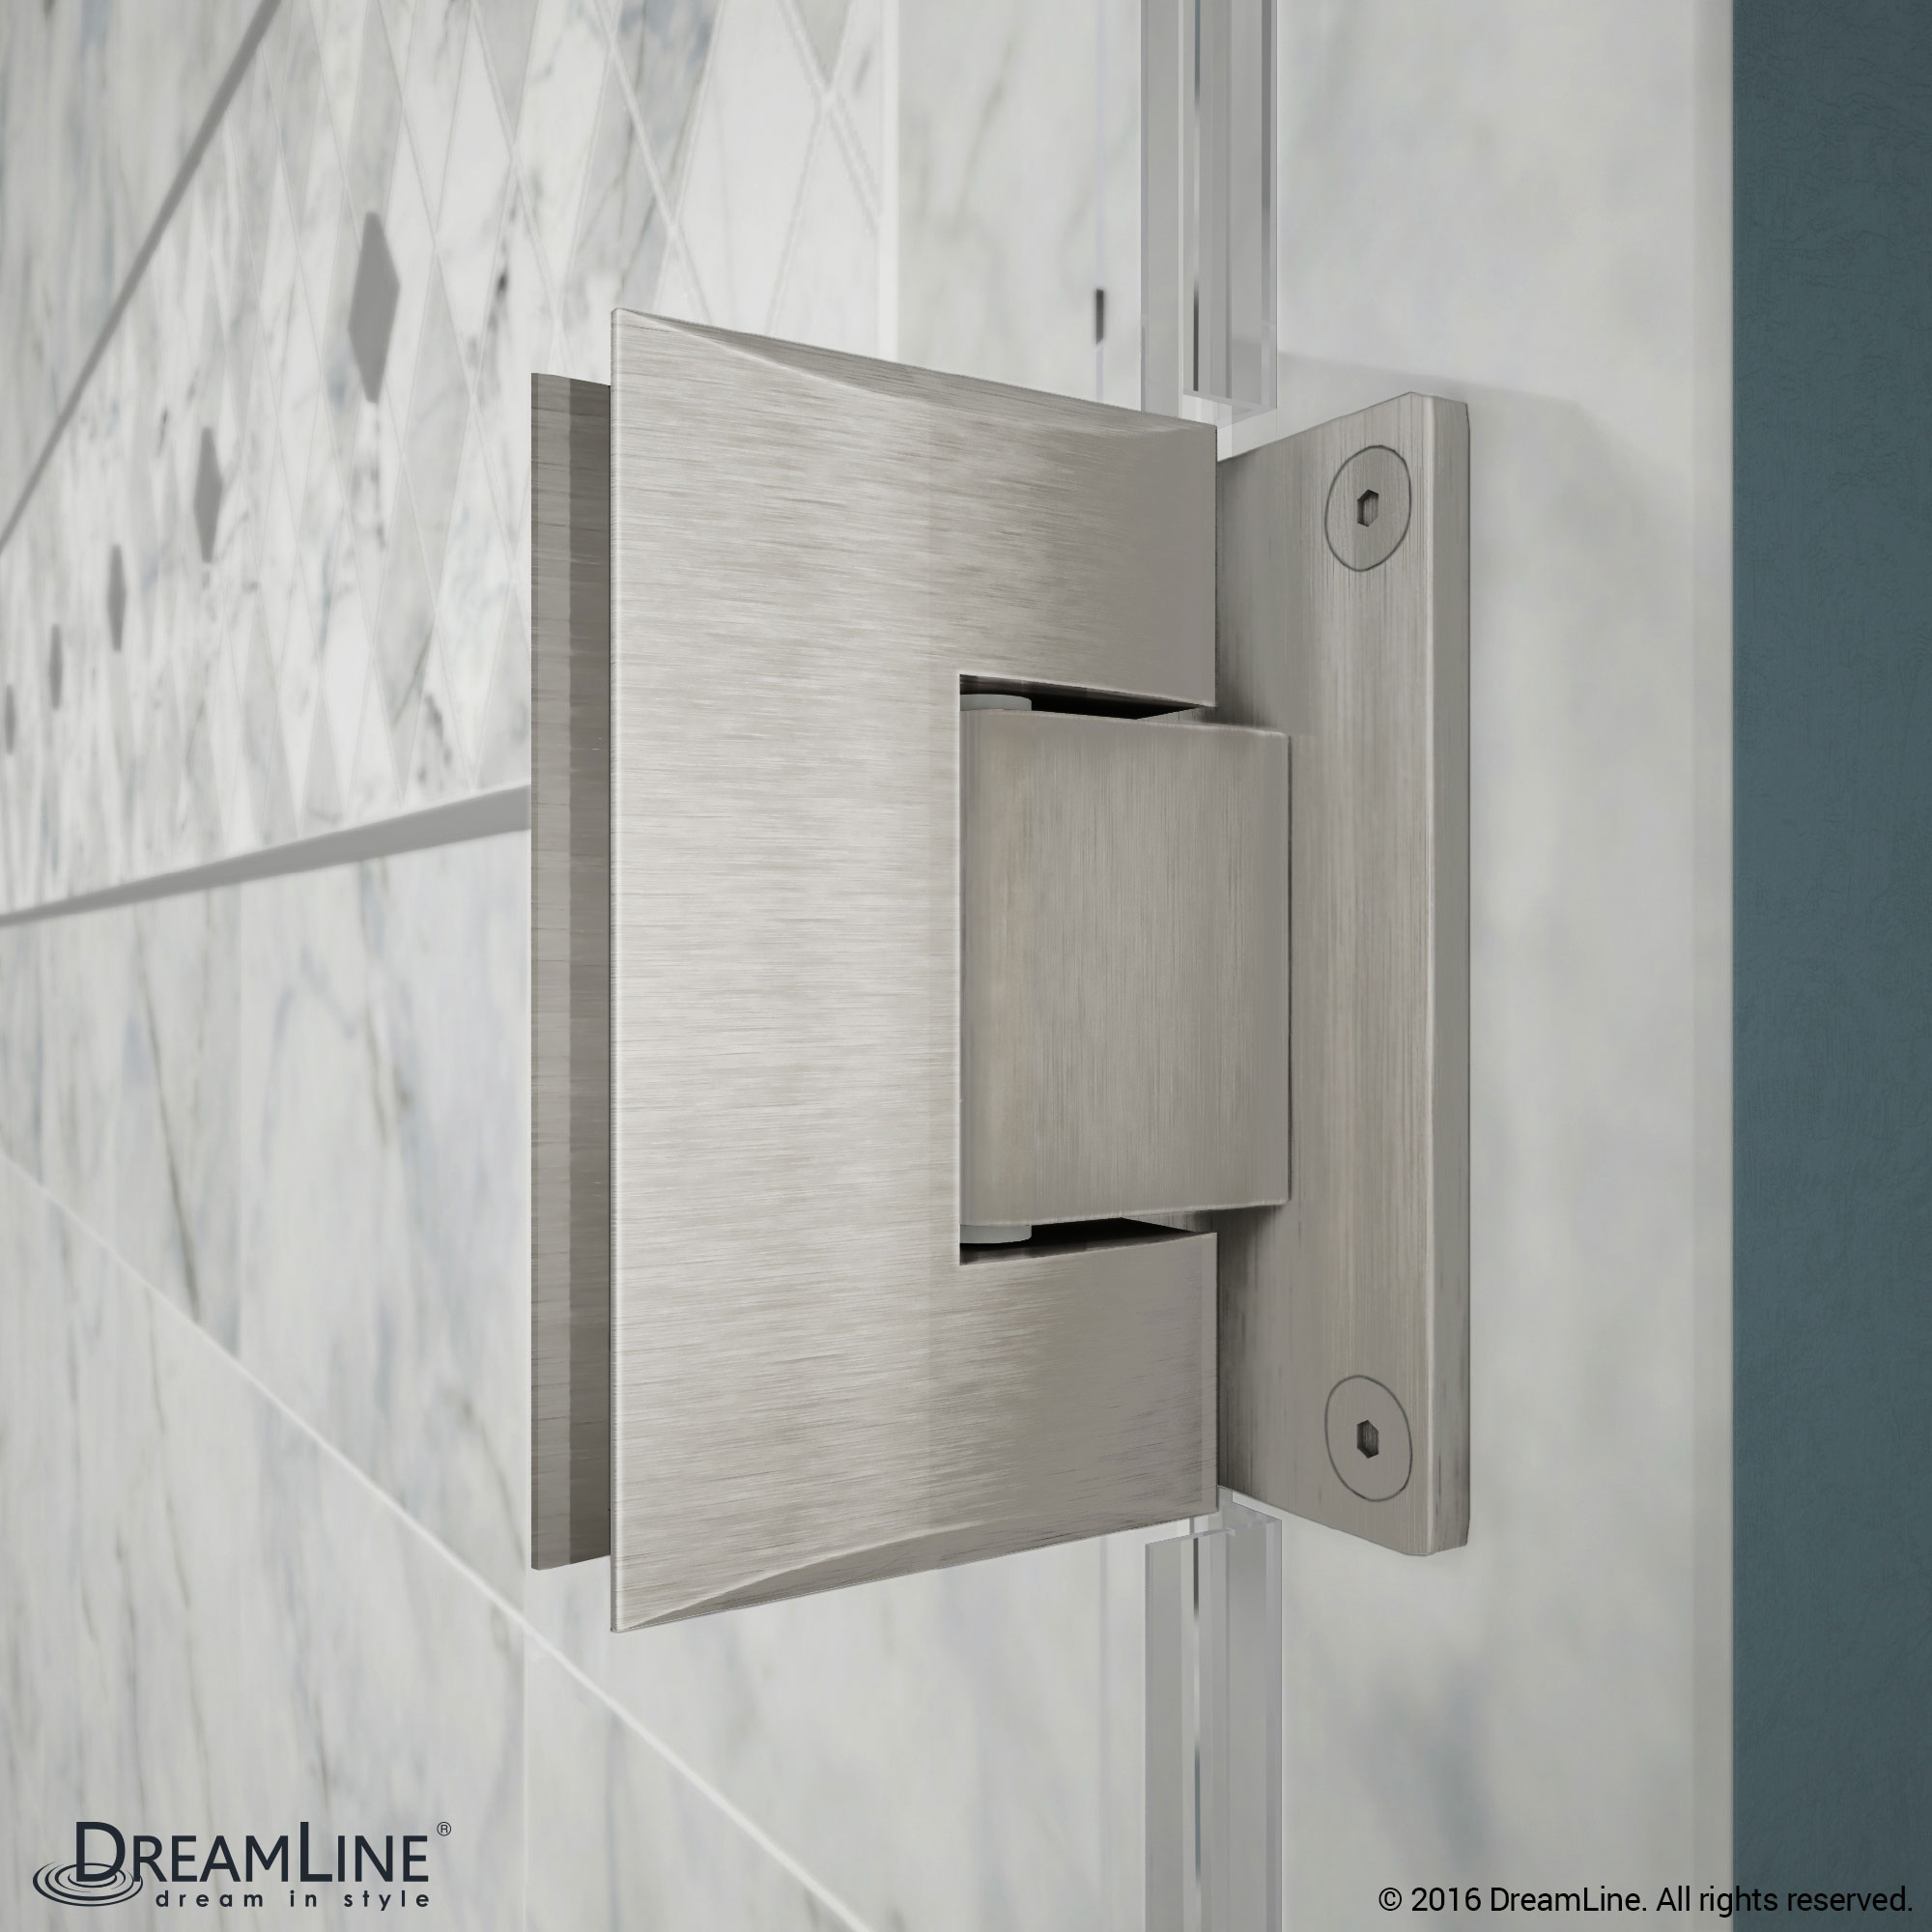 DreamLine Unidoor Lux 58 in. W x 72 in. H Fully Frameless Hinged Shower Door with L-Bar in Brushed Nickel